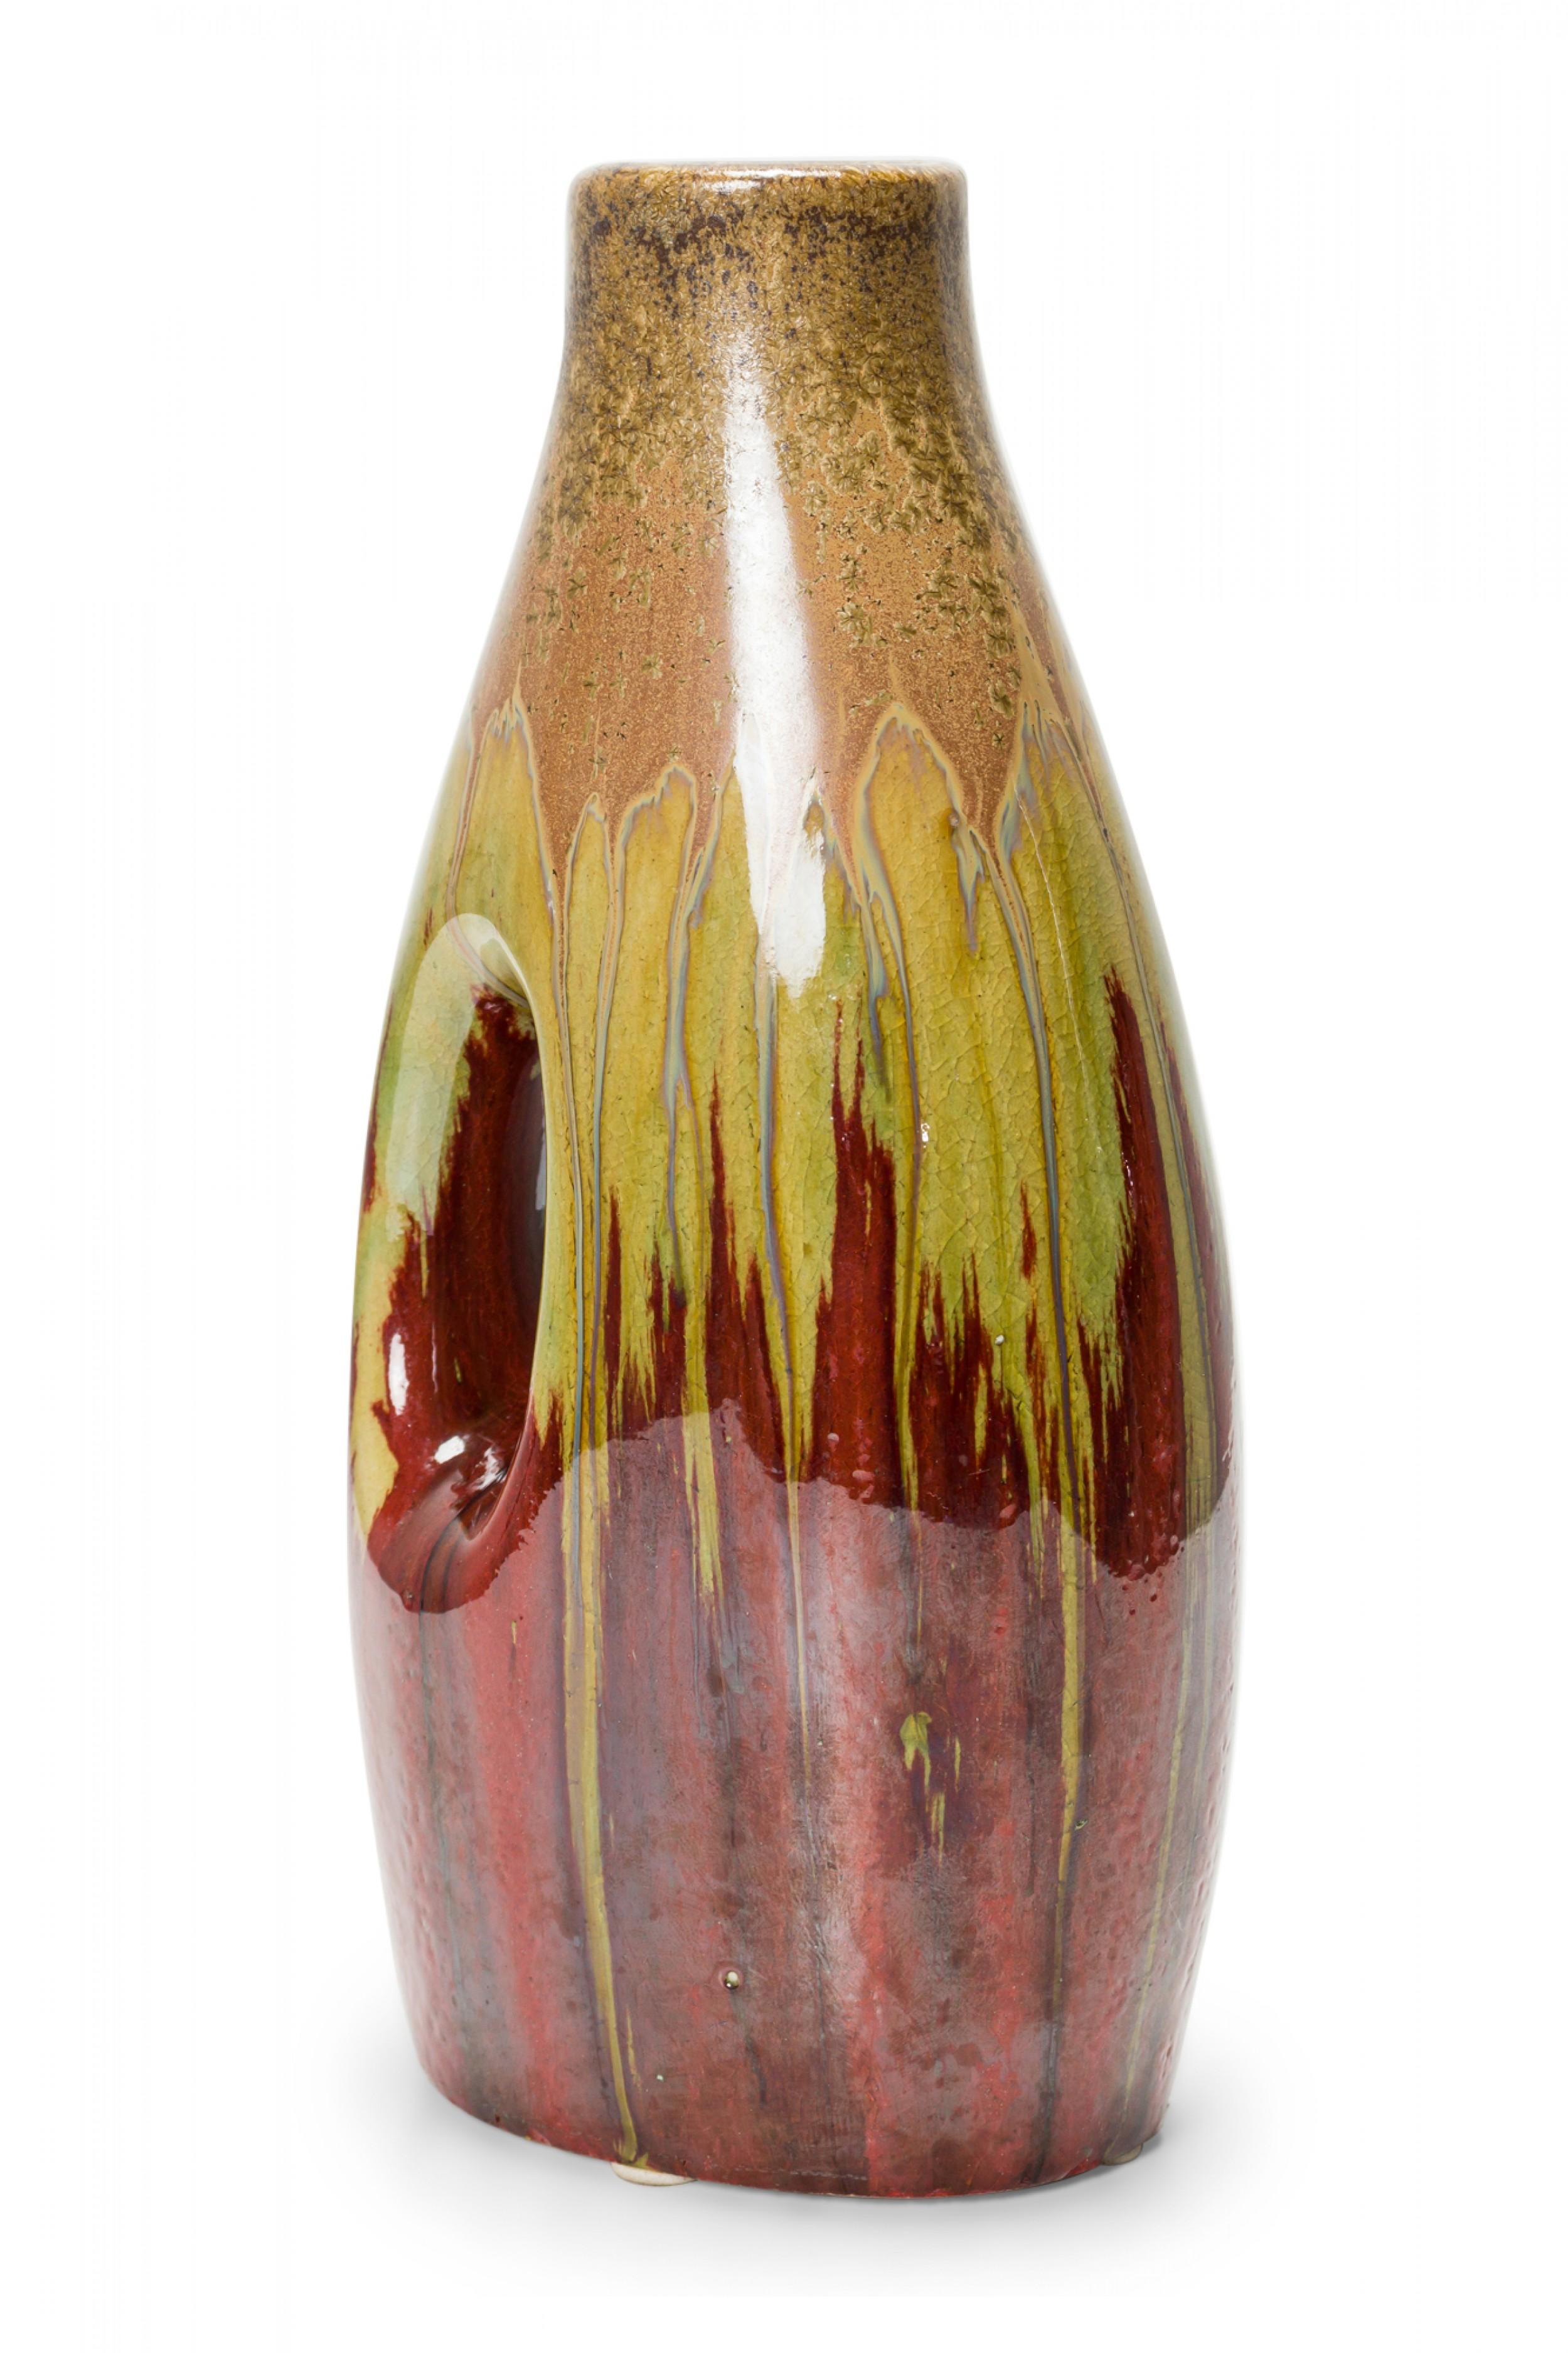 German mid-century ceramic vase with a cut out oval space and a green, beige, and brown drip glaze.